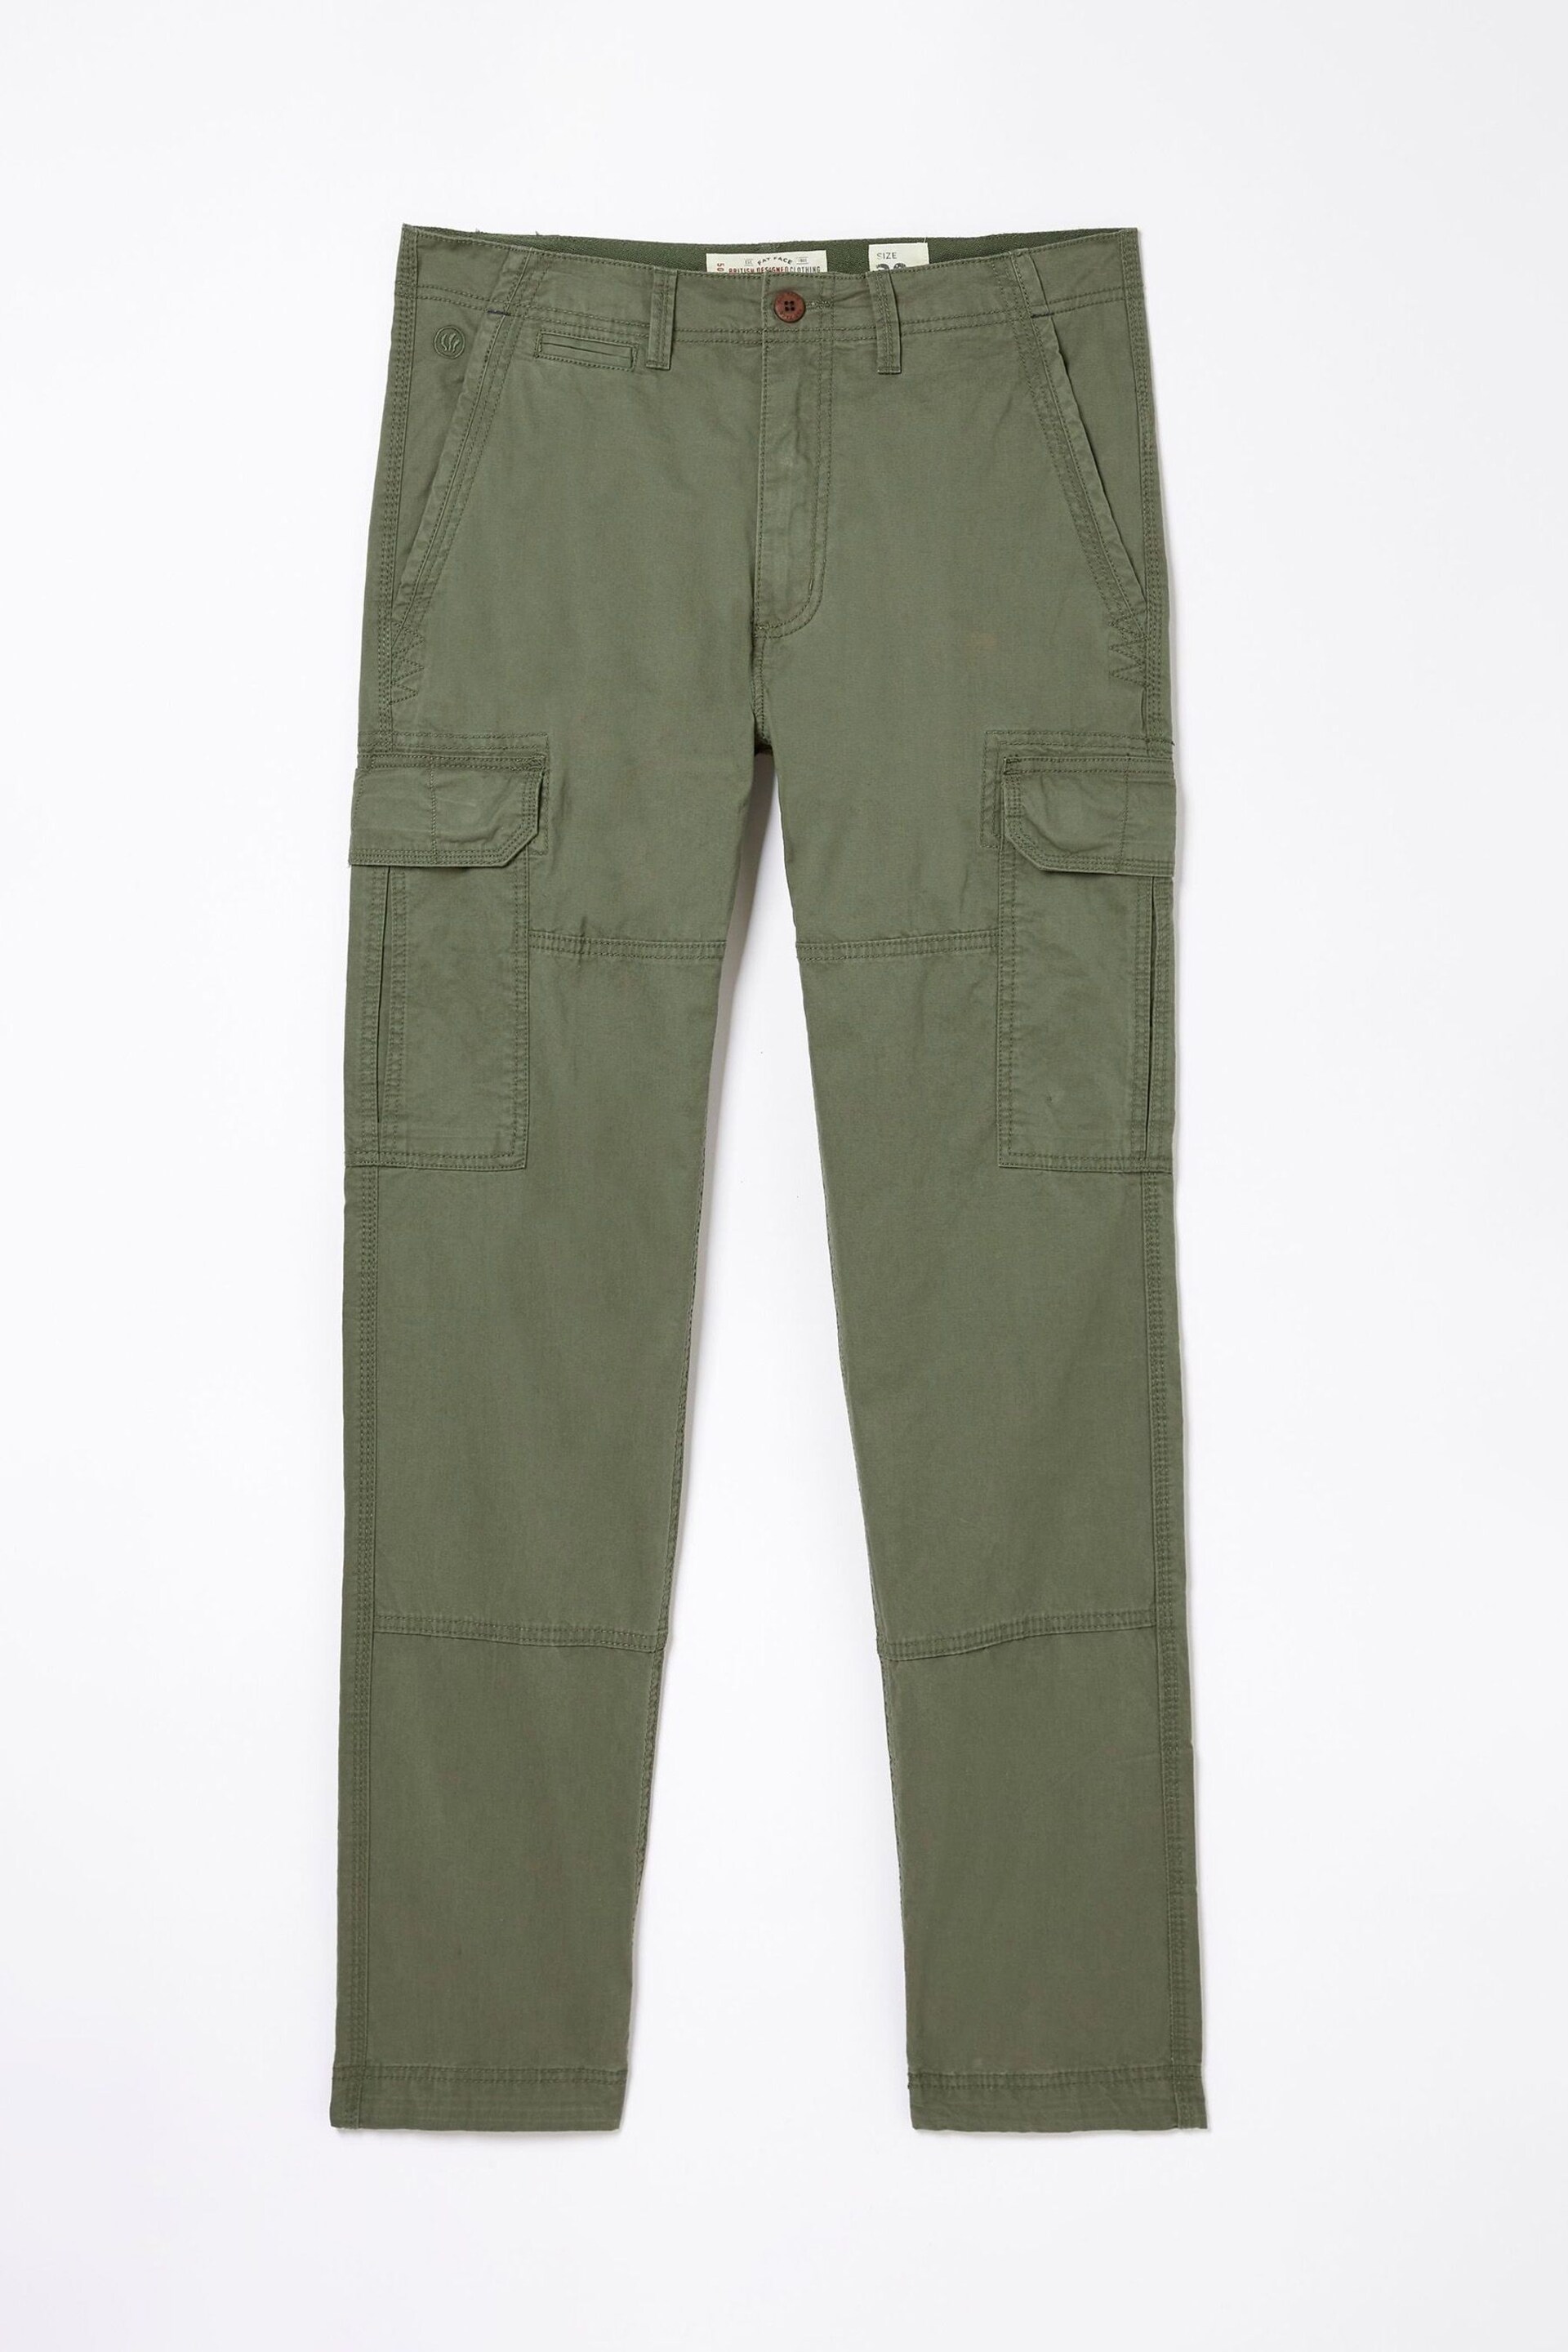 FatFace Green Corby Ripstop Cargo Trousers - Image 5 of 5